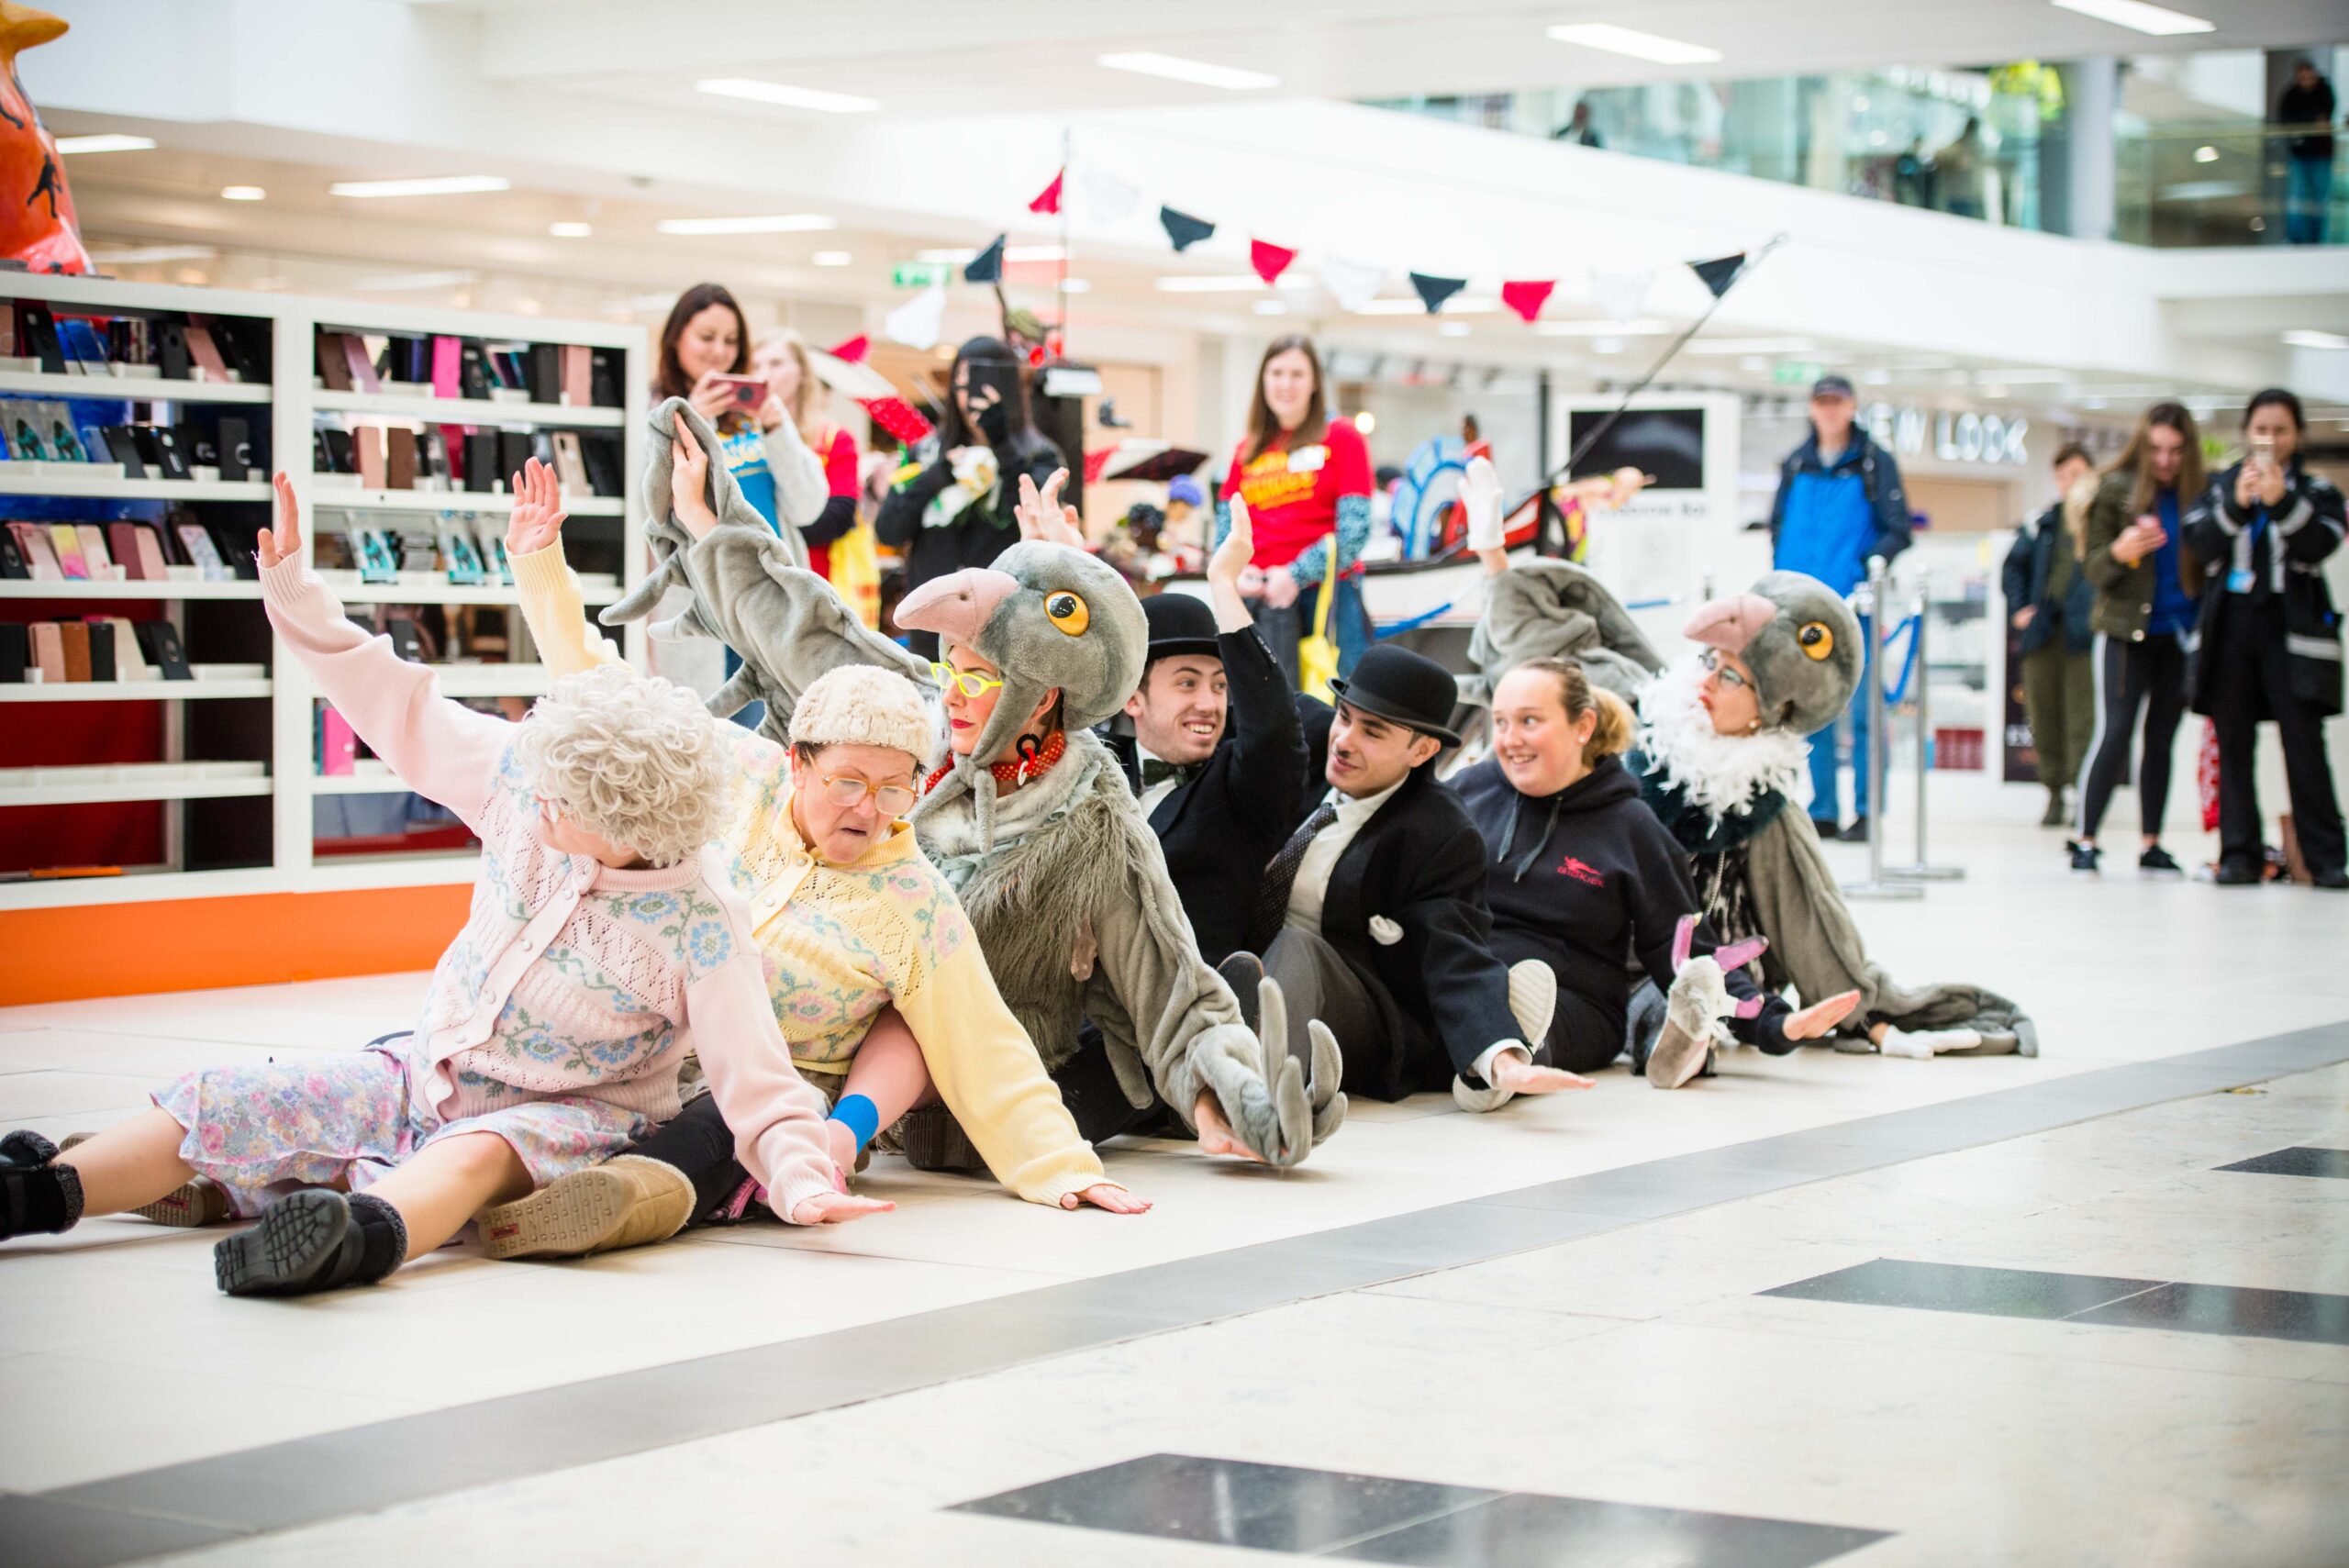 A photograph of group of people in a shopping centre. two of them wearing pigeon costumes and there are four people watching.